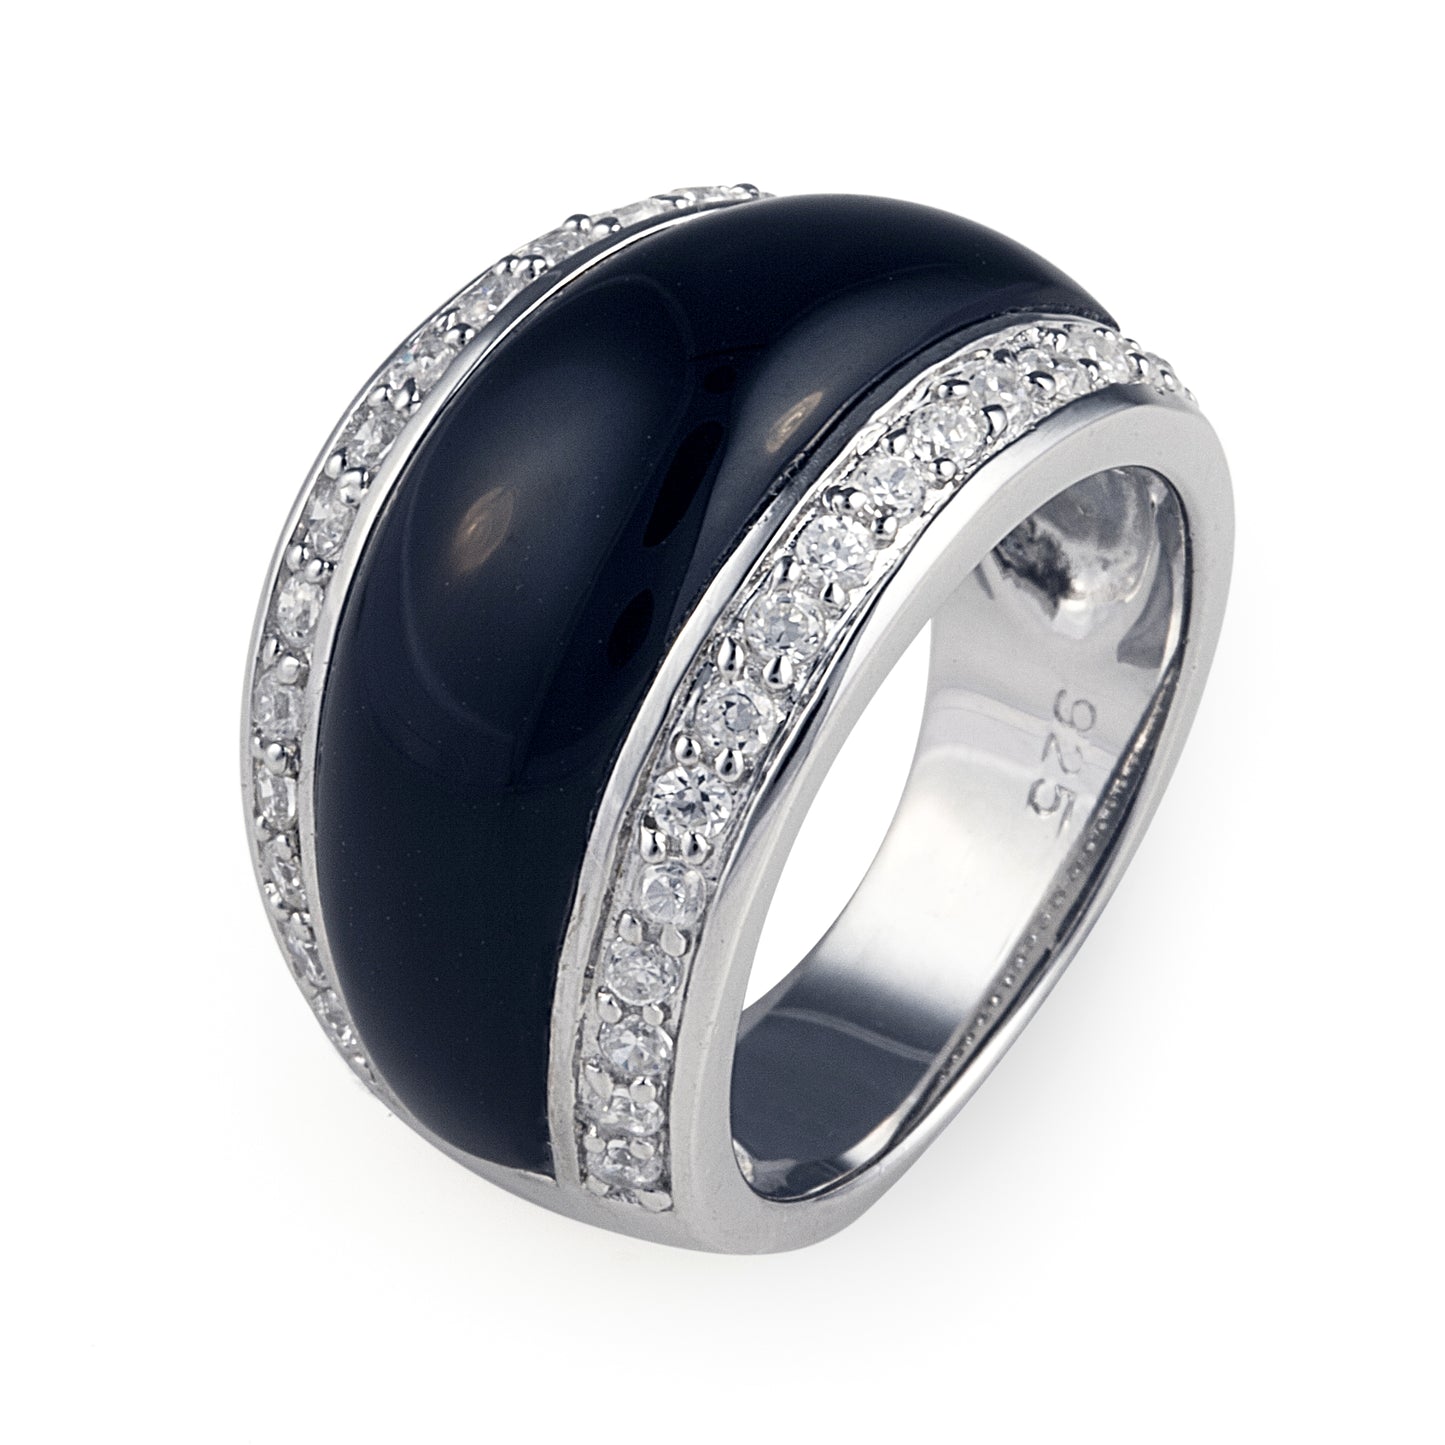 The Onyx Eye Ring is a lovely 925 sterling silver ring featuring a tapered polished black onyx surrounded by cubic zirconia stones.  Shop rings and luxury jewellery at affordable prices by Bellagio & Co. Designed in Australia. Worldwide Shipping.